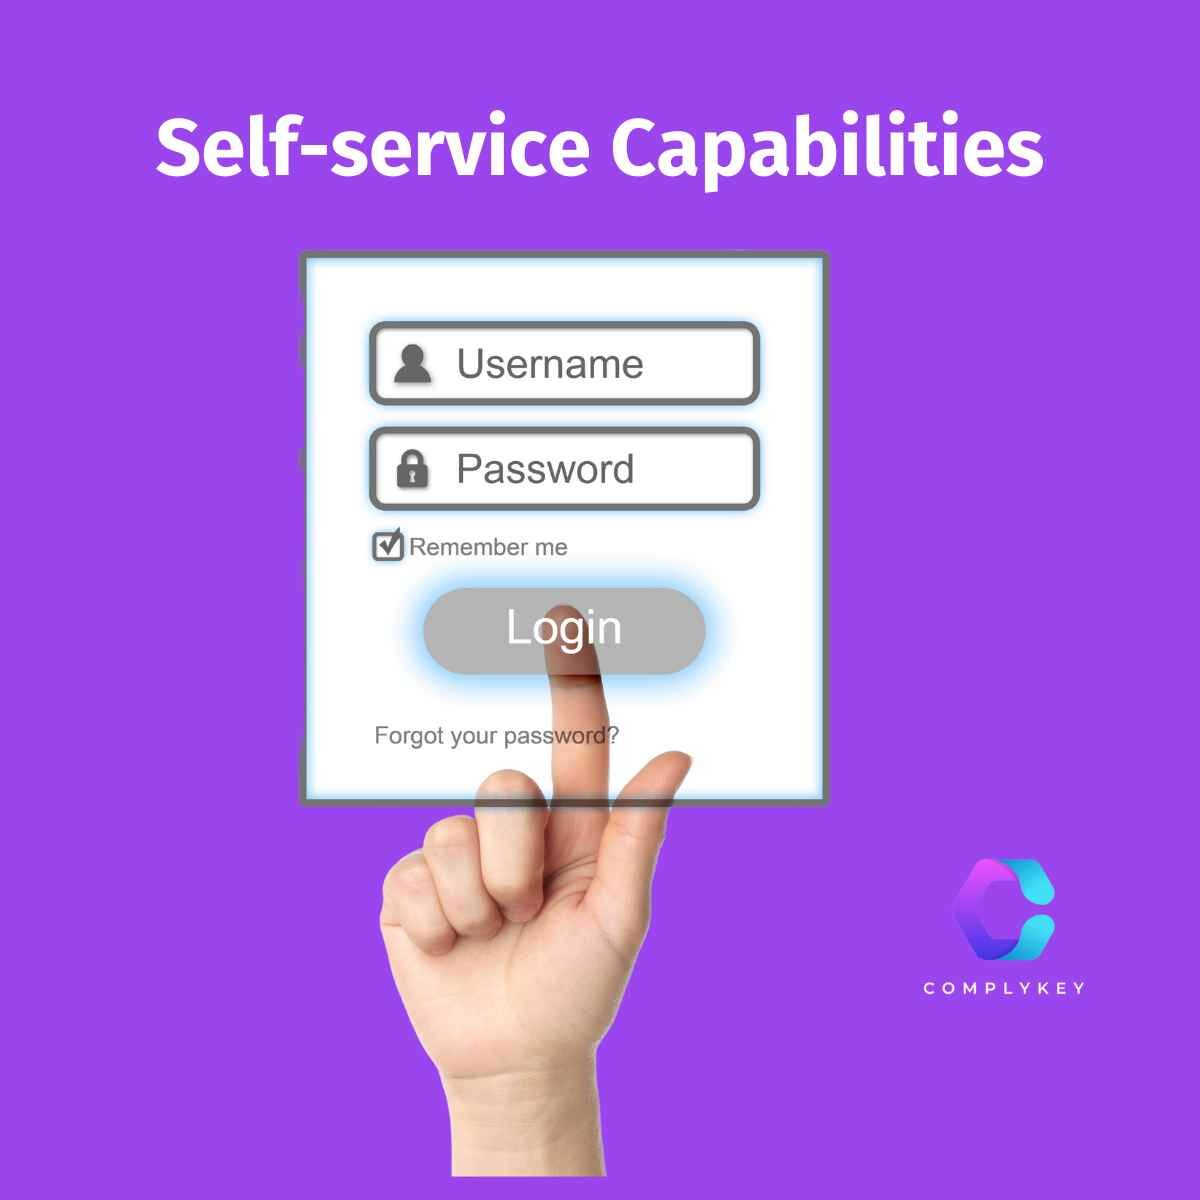 Transparency matters. Explore how self-service portals revolutionize the records request process, empowering requesters and reducing administrative burden. Learn how this functionality enhances accessibility and builds trust
#Transparency #SelfService #Accessibility #Compliance